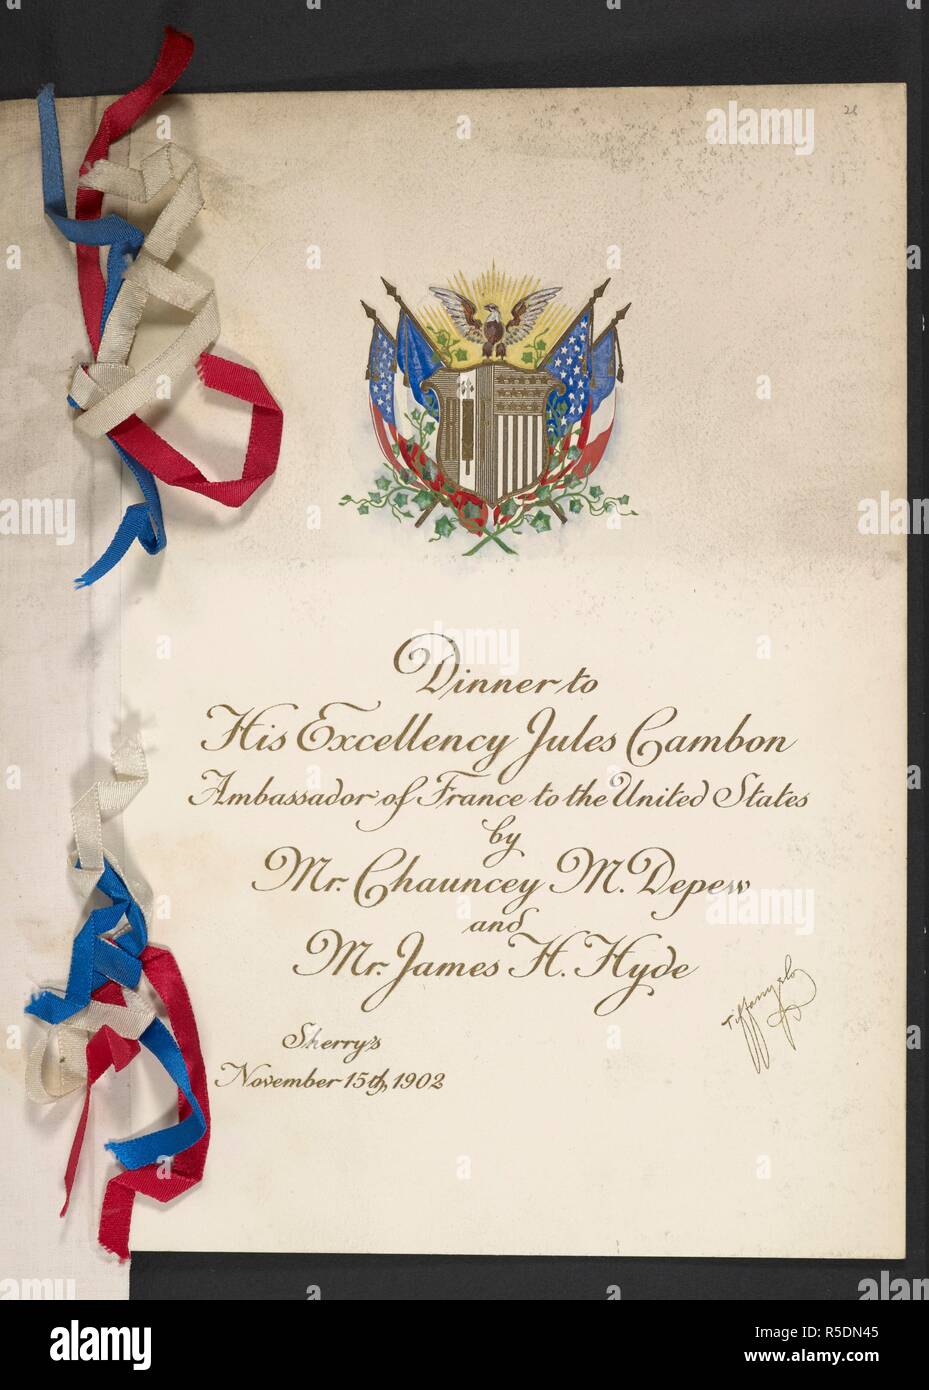 Menu cover. Dinner to his excellency Jules Gambon, Ambassador of France to the United States by Mr Chauncey M. Depew and Mr. James H. Hyde. Sherry's. November 15th, 1902. [A collection of menu cards of dinners and reports of celebrations in the United States of America in the years 1890-1904, formed by Miss F. E. Buttolph. Bound in three volumes.]. [1890-1904.]. Source: C.120.f.2 Volume 4 no. 26 (cover). Language: English. Stock Photo